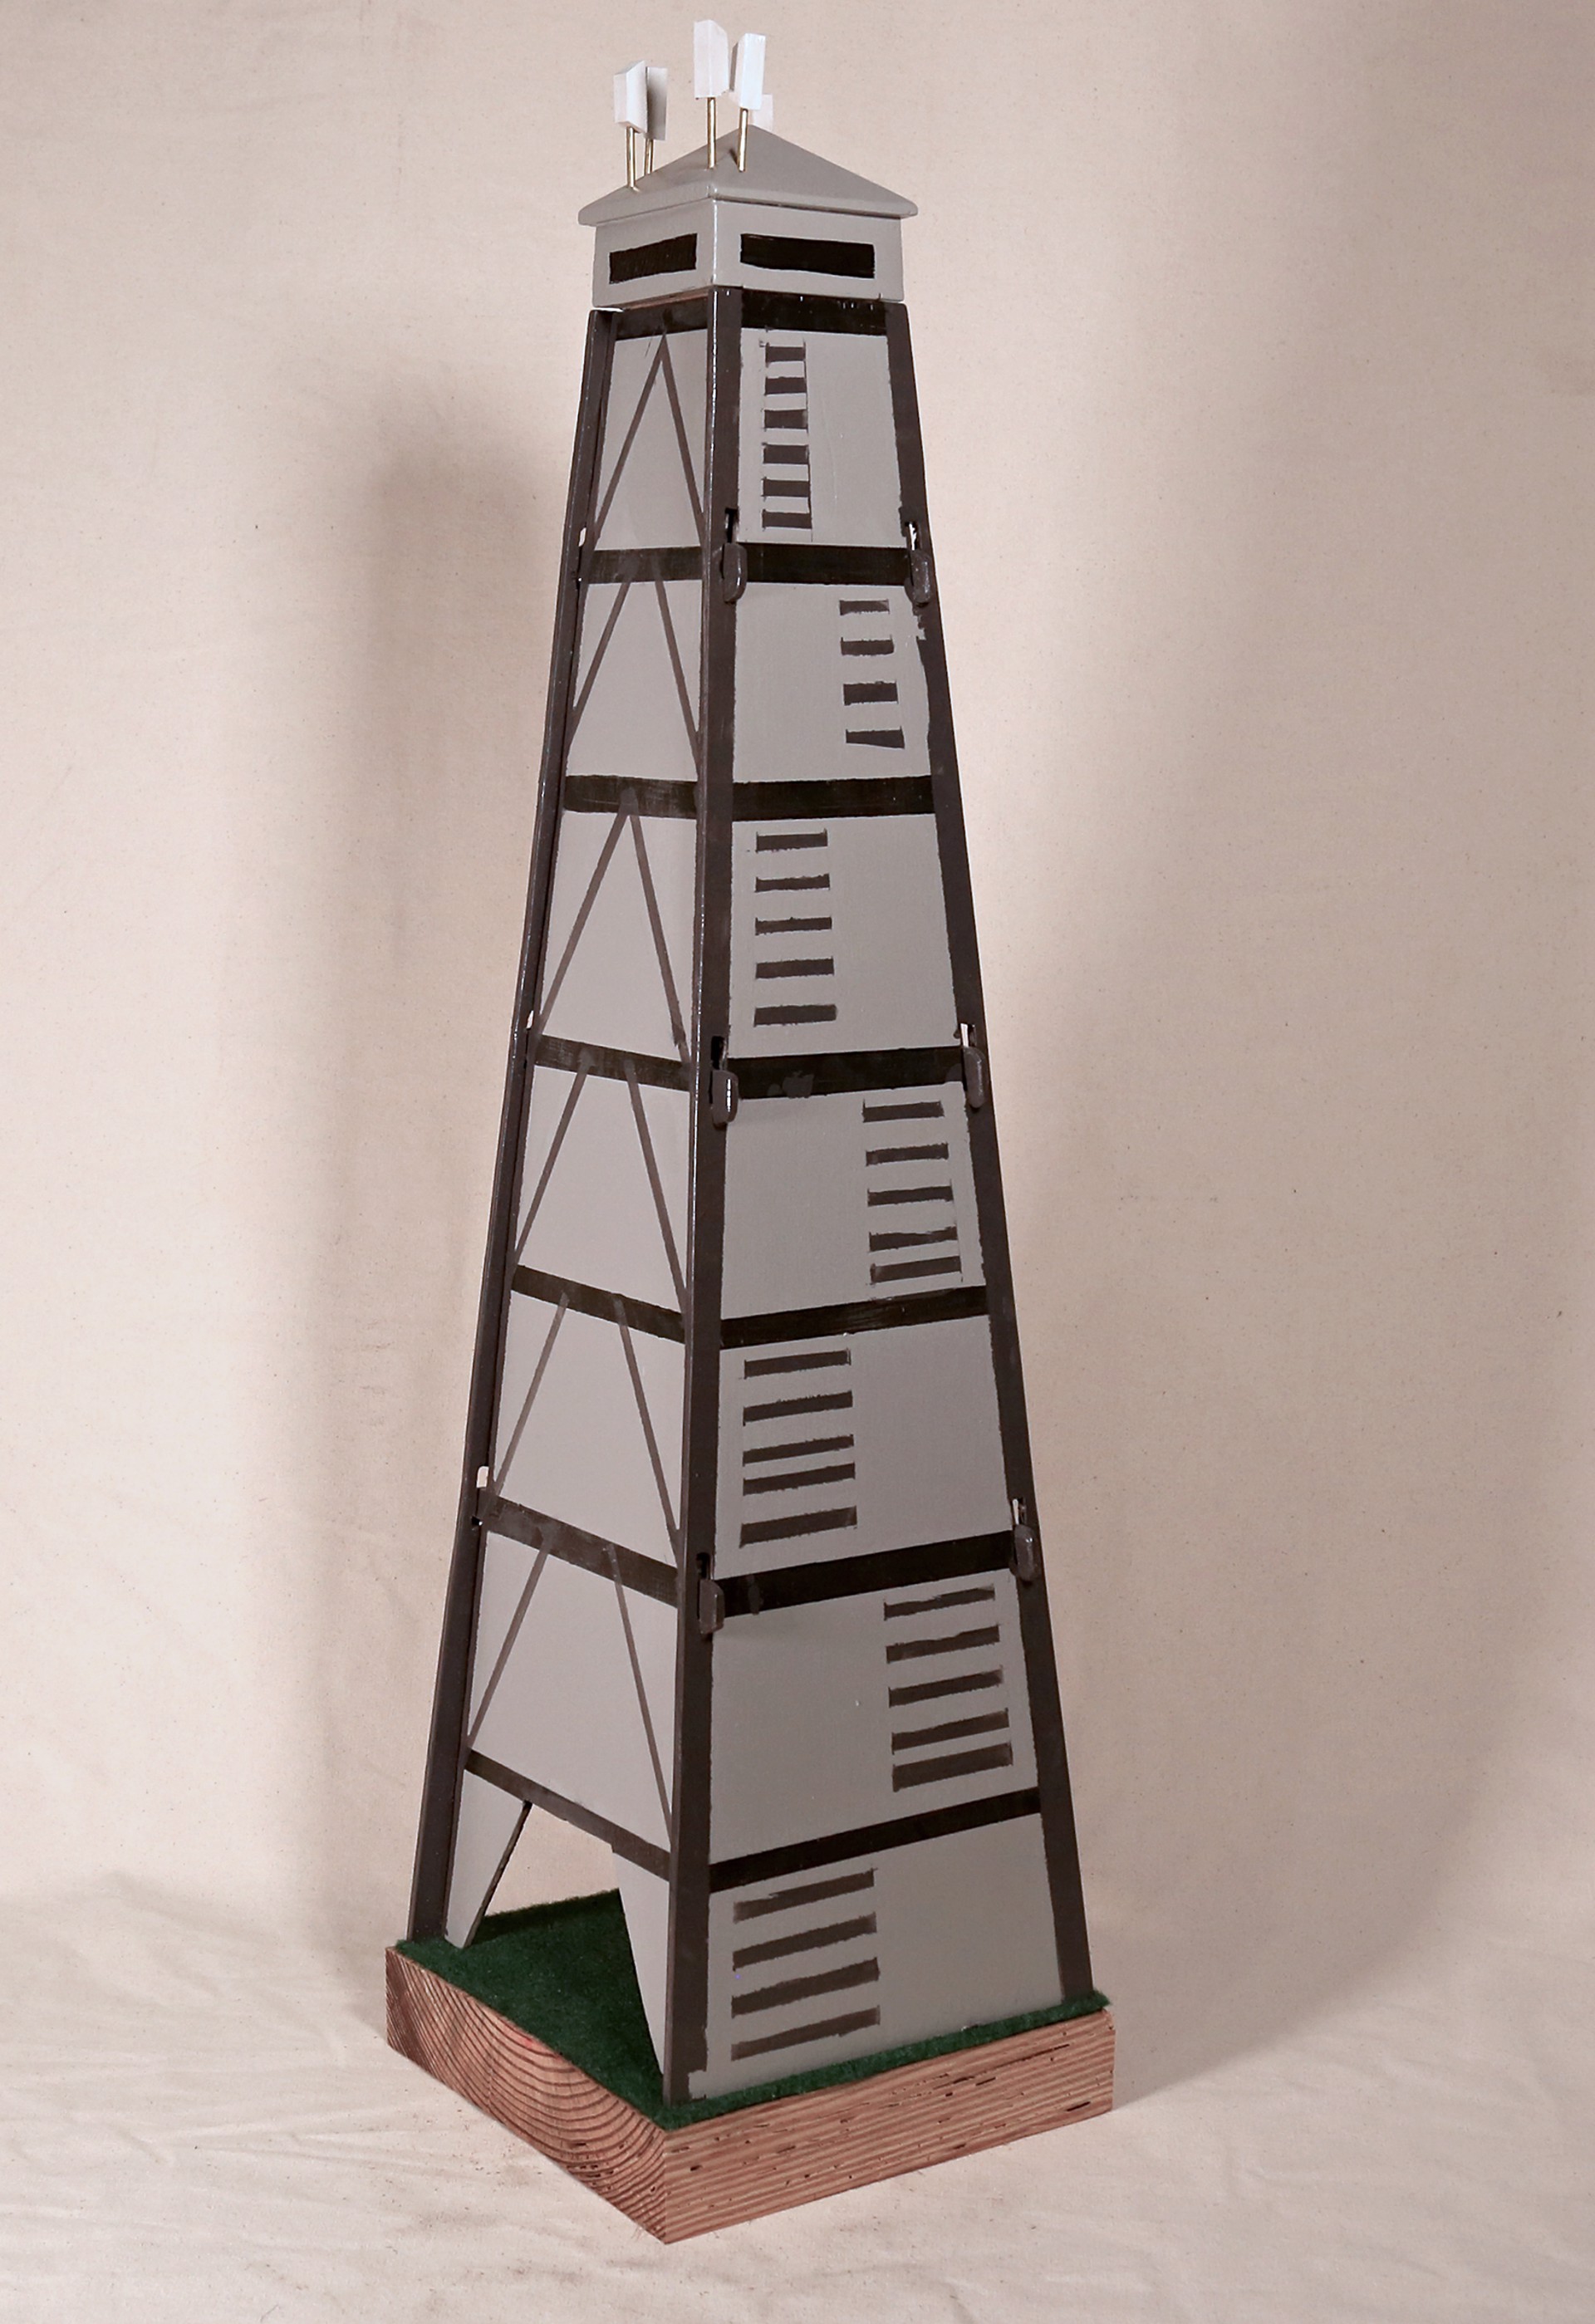 Forestry (Cell) Tower by Robert Hightower